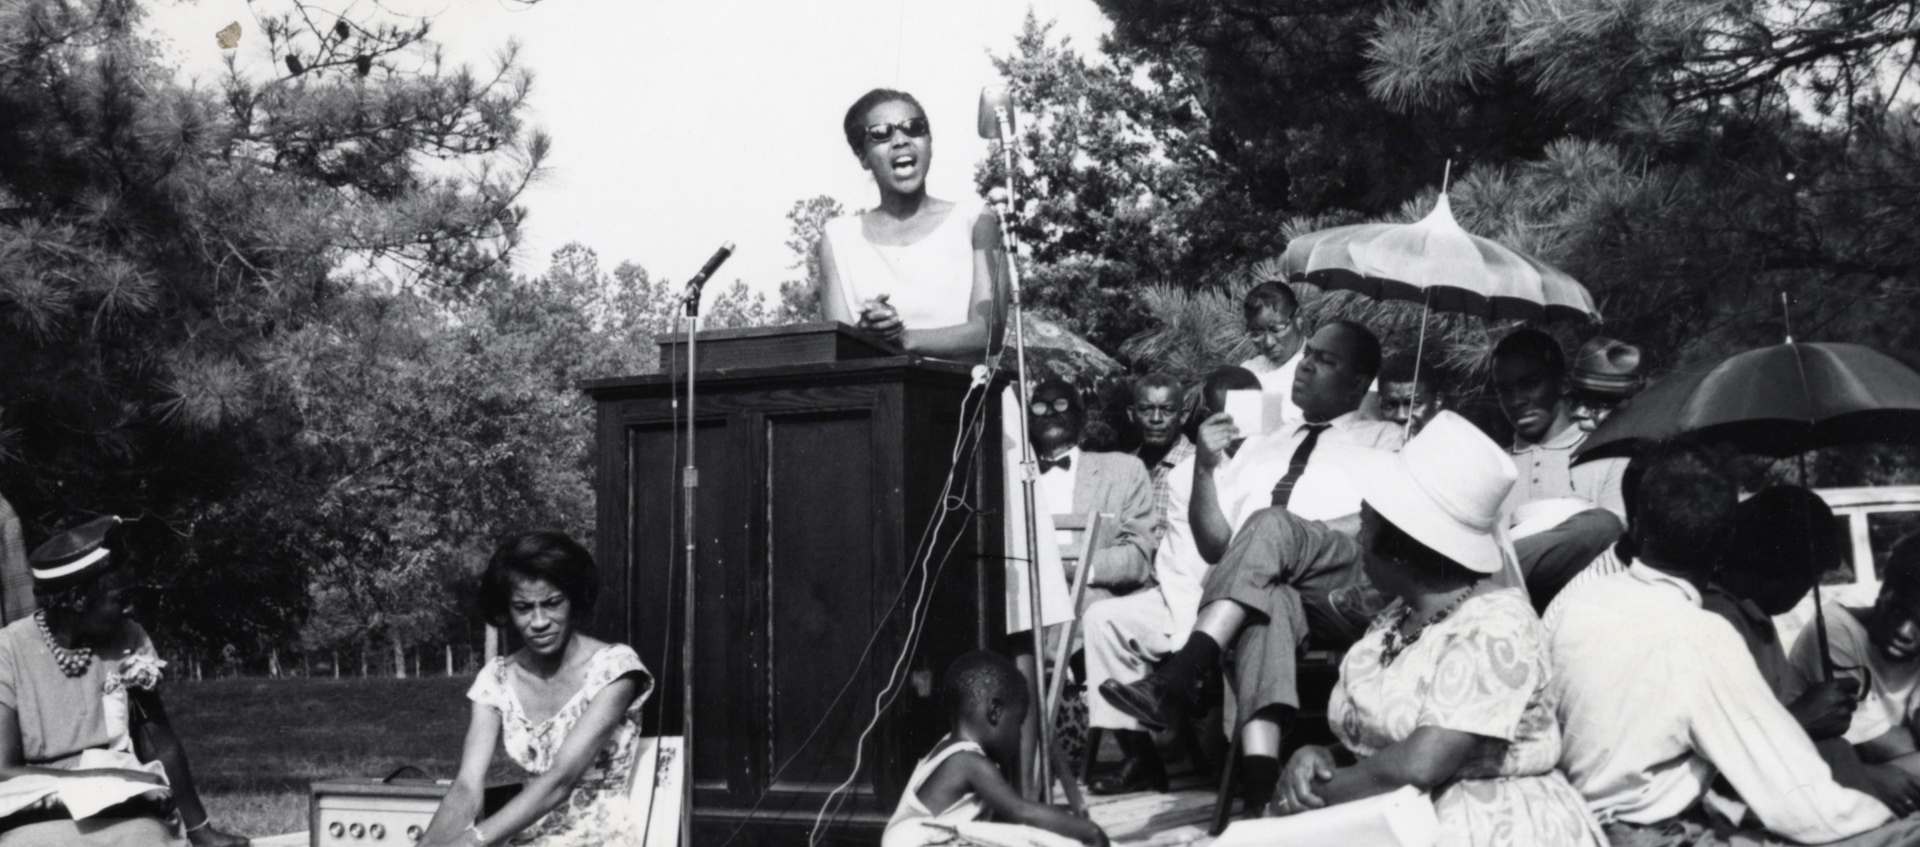 Archive black and white photo of activist Ella Baker speaking at a podium in a wooded park, surrounded by Black men, women, and children standing, sitting, and listening